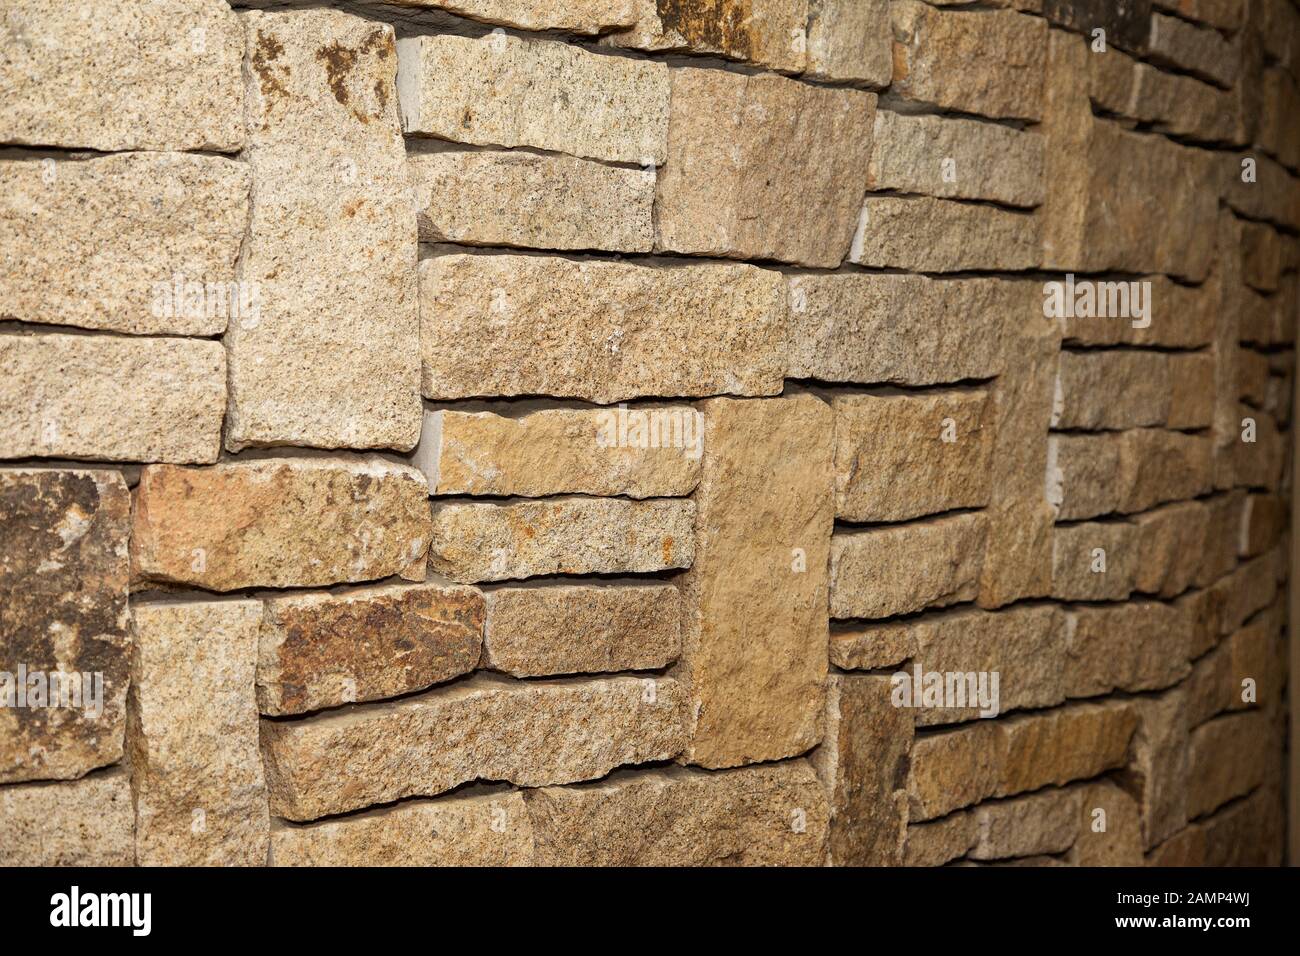 Close-up shot of a stone wall made of cut sandstone blocks. Stock Photo